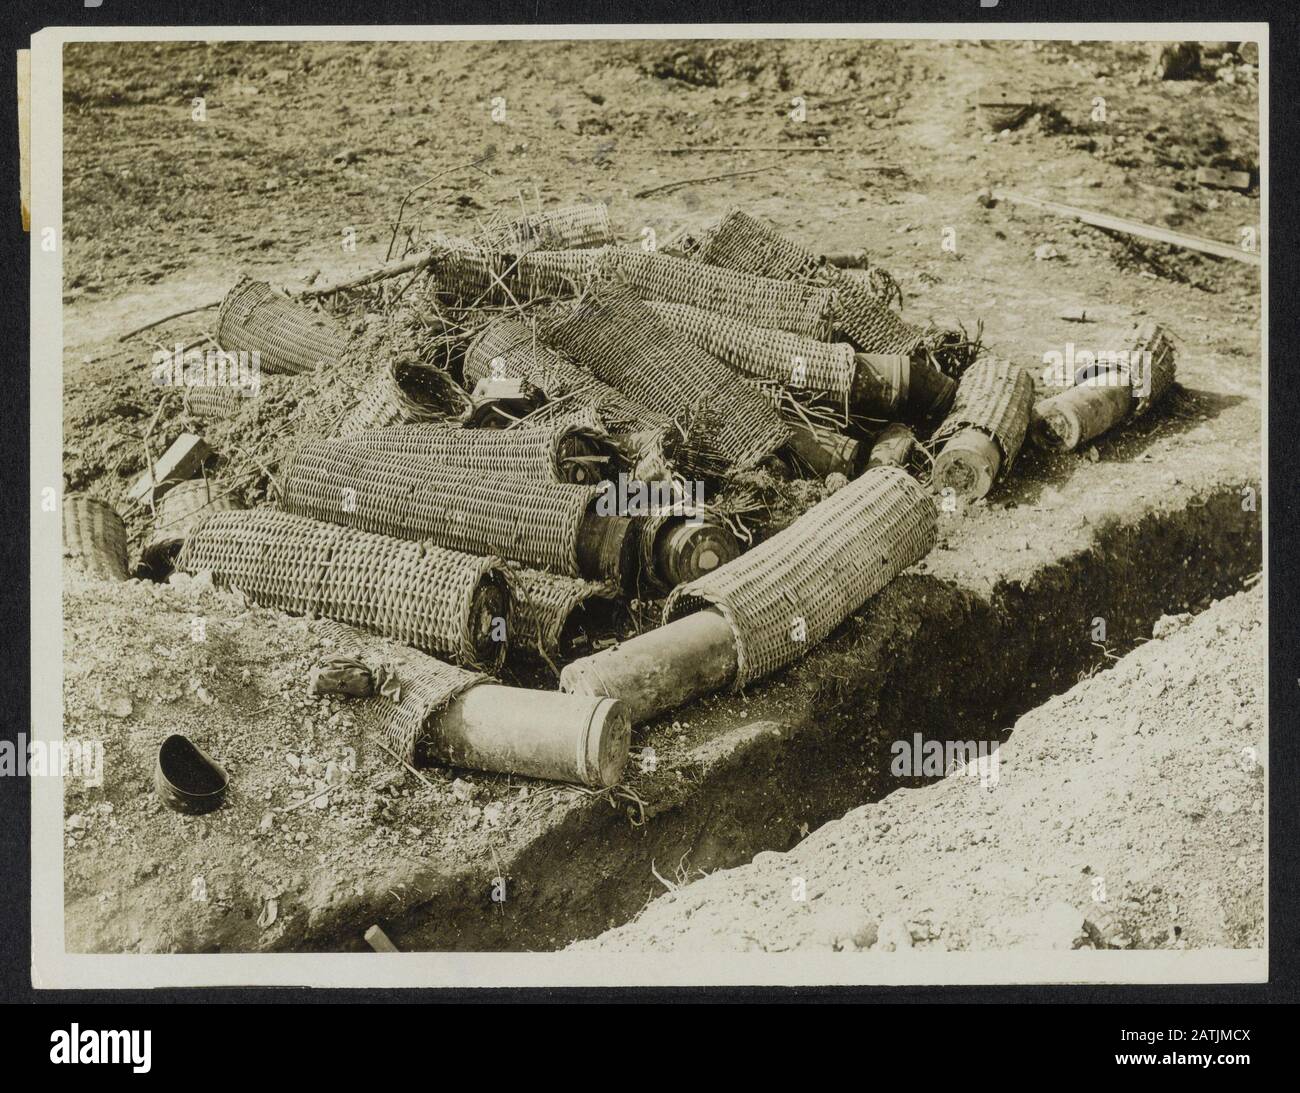 The Western Front Description: Some of the large ammunition left When the Huns had to clear out of Morval Annotation: The Western Front. The Germans left behind heavy ammunition at their forced flight from Morval Date: {1914-1918} Location: France, Morval Keywords: WWI, fronts, ammunition Stock Photo